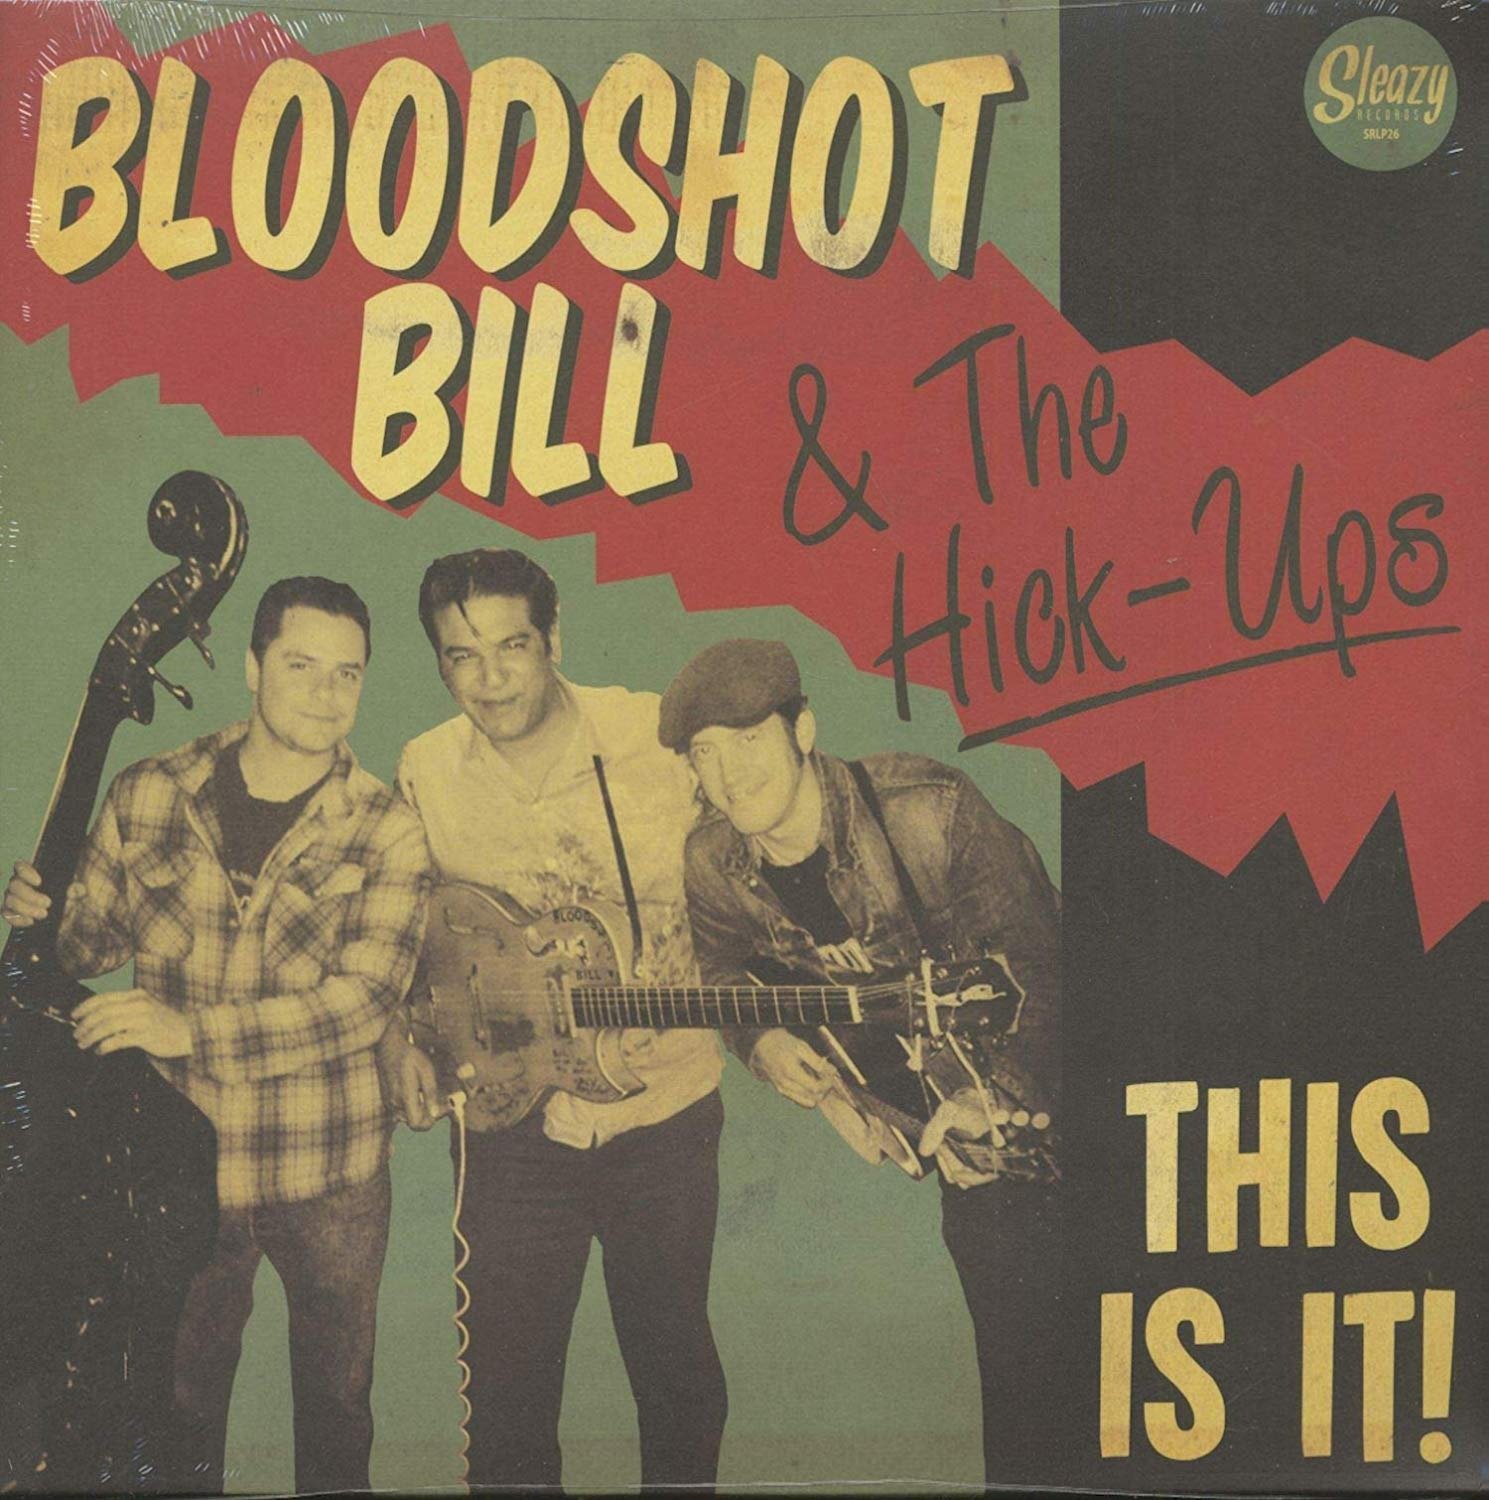 CD Shop - BLOODSHOT BILL & THE HICK THIS IS IT!